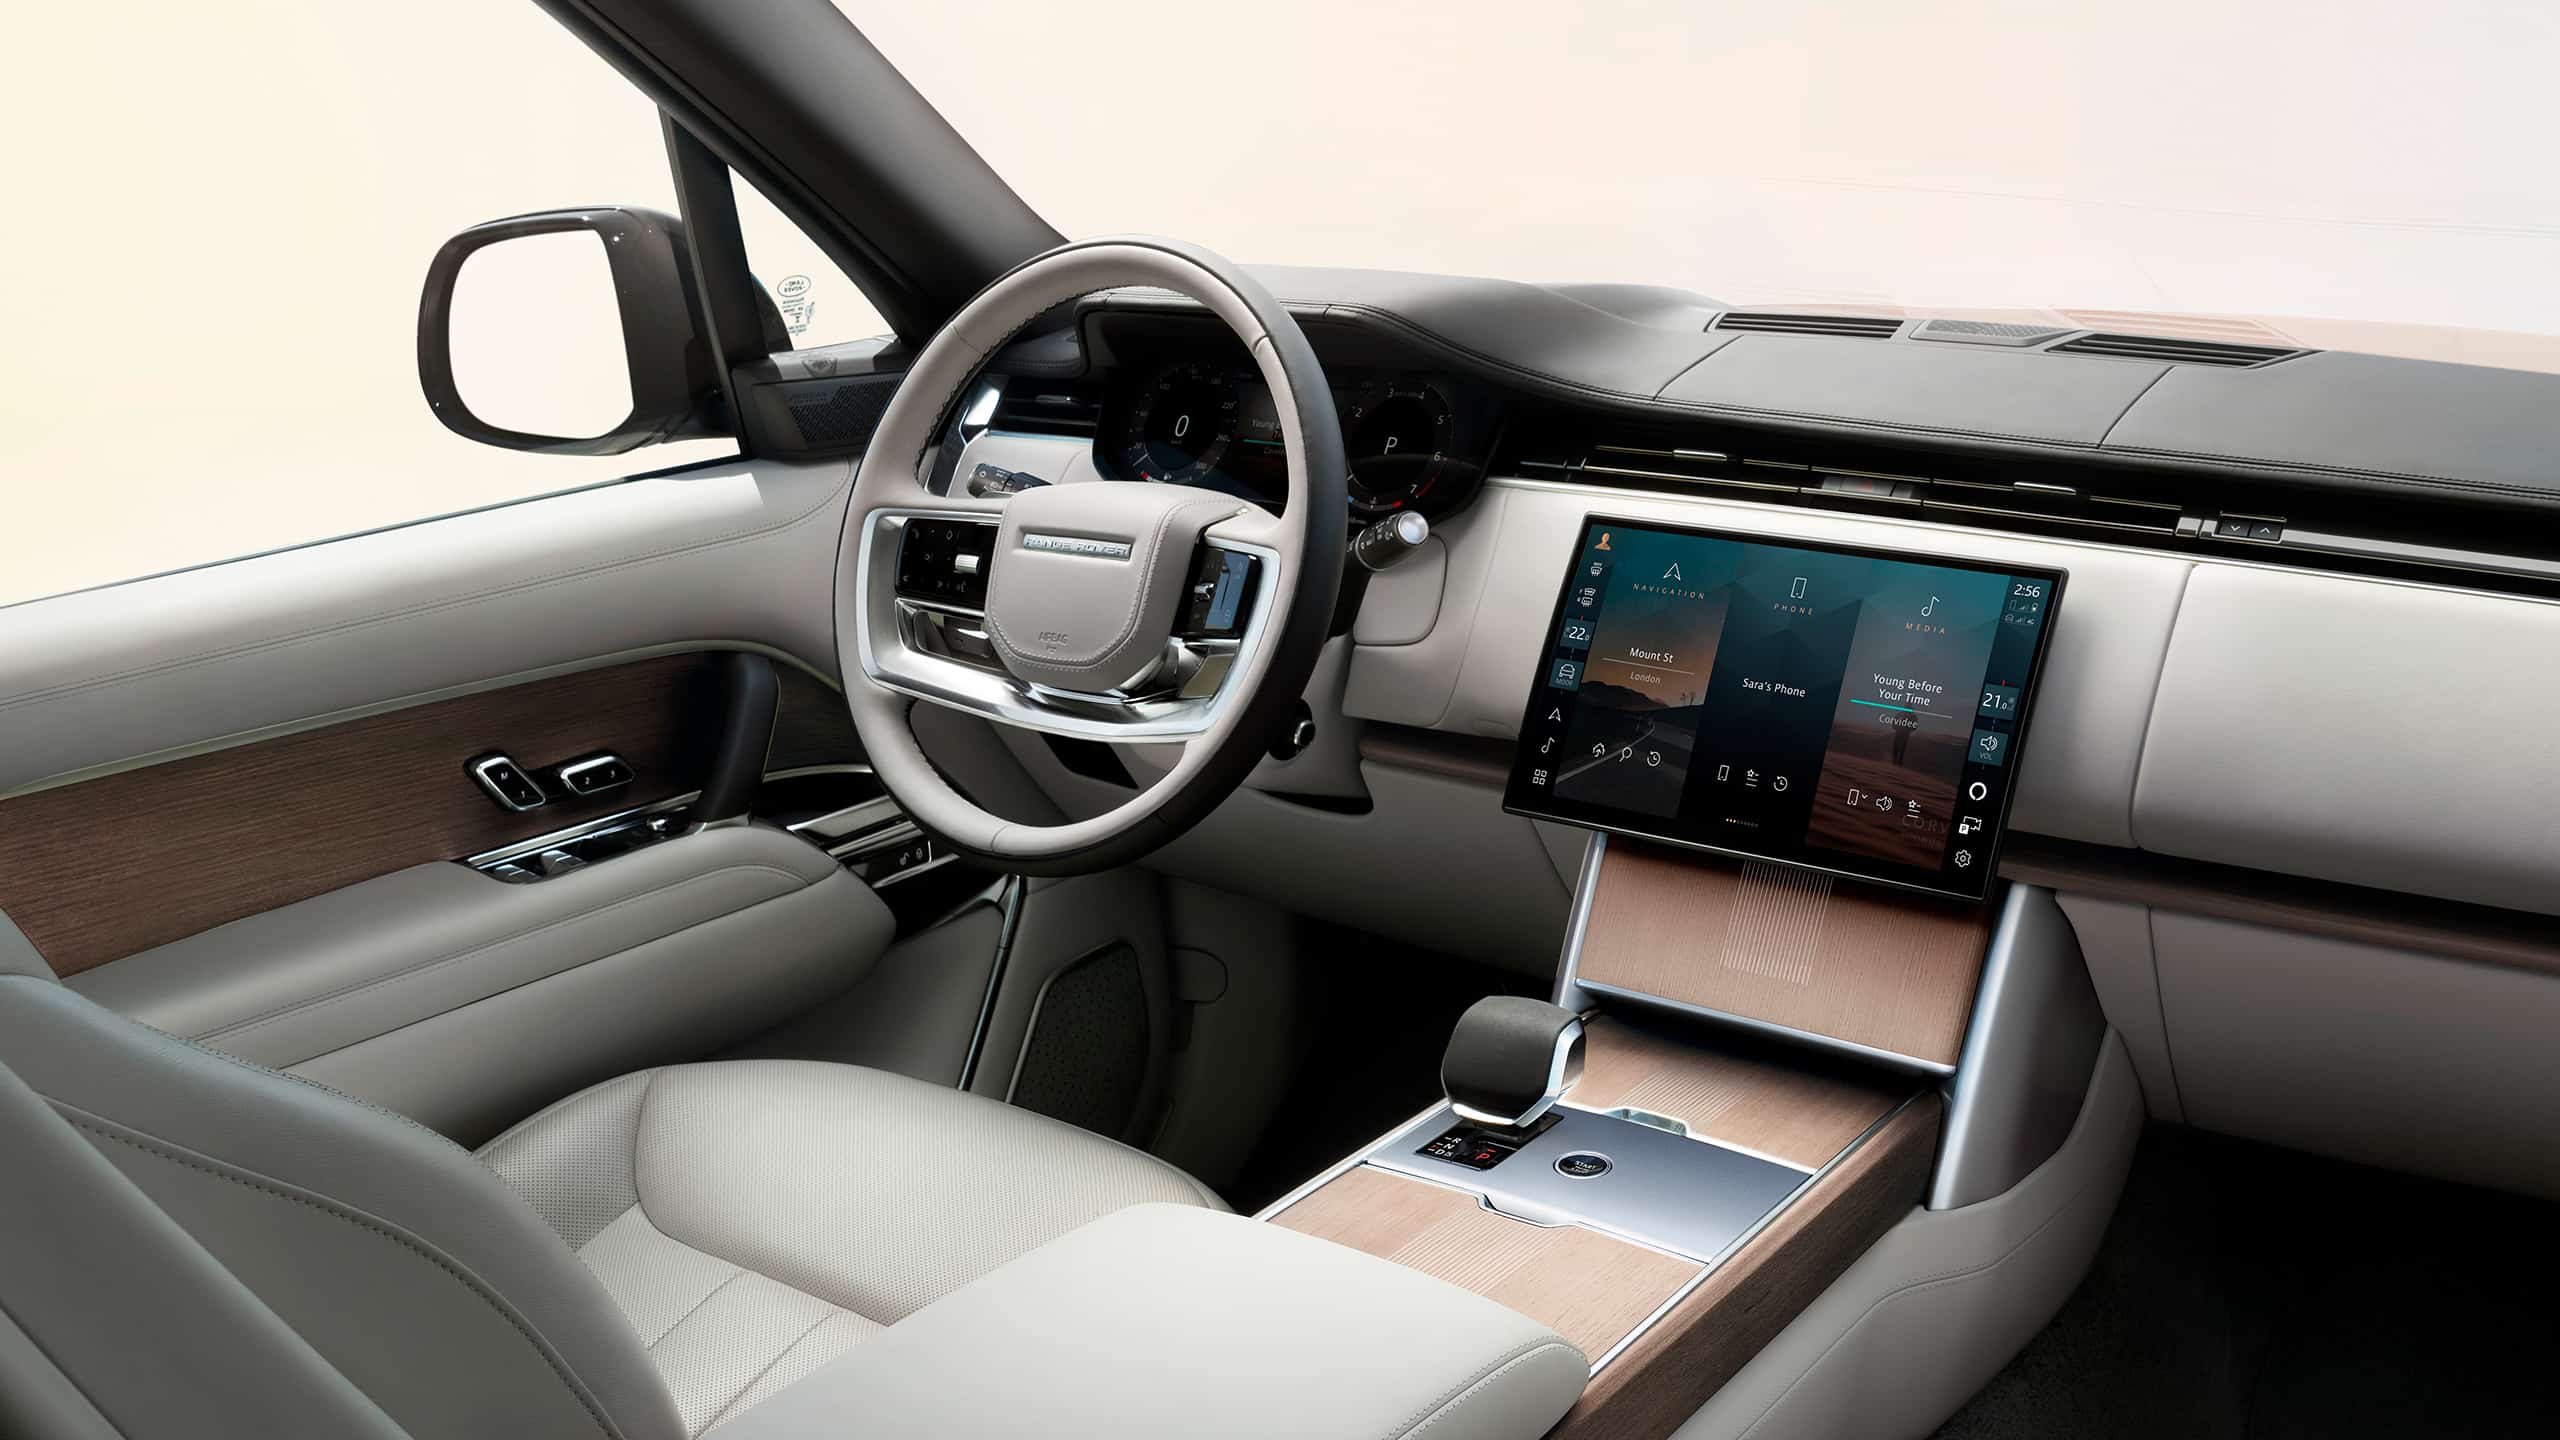 Range Rover interior dashboard and infotainment system.